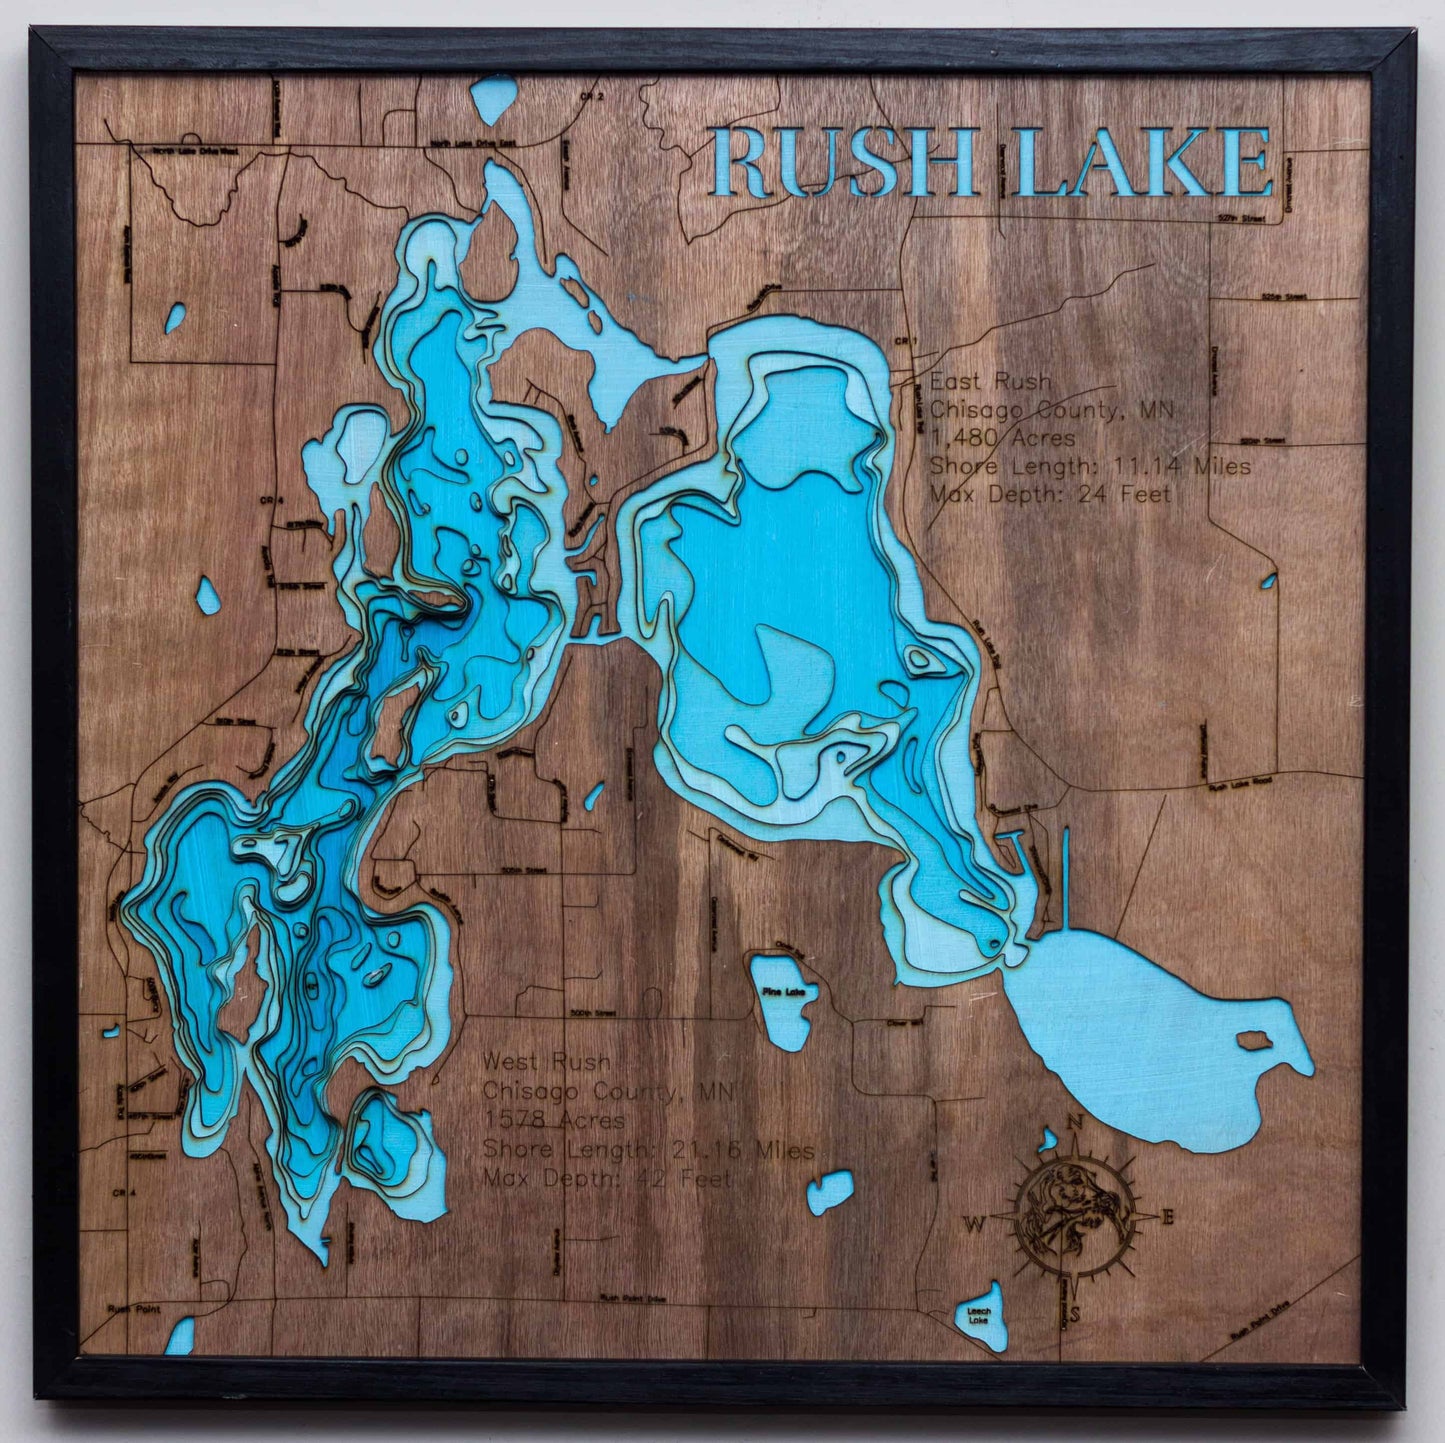 3d Lake Map of Rush Lake in Chisago County, MN